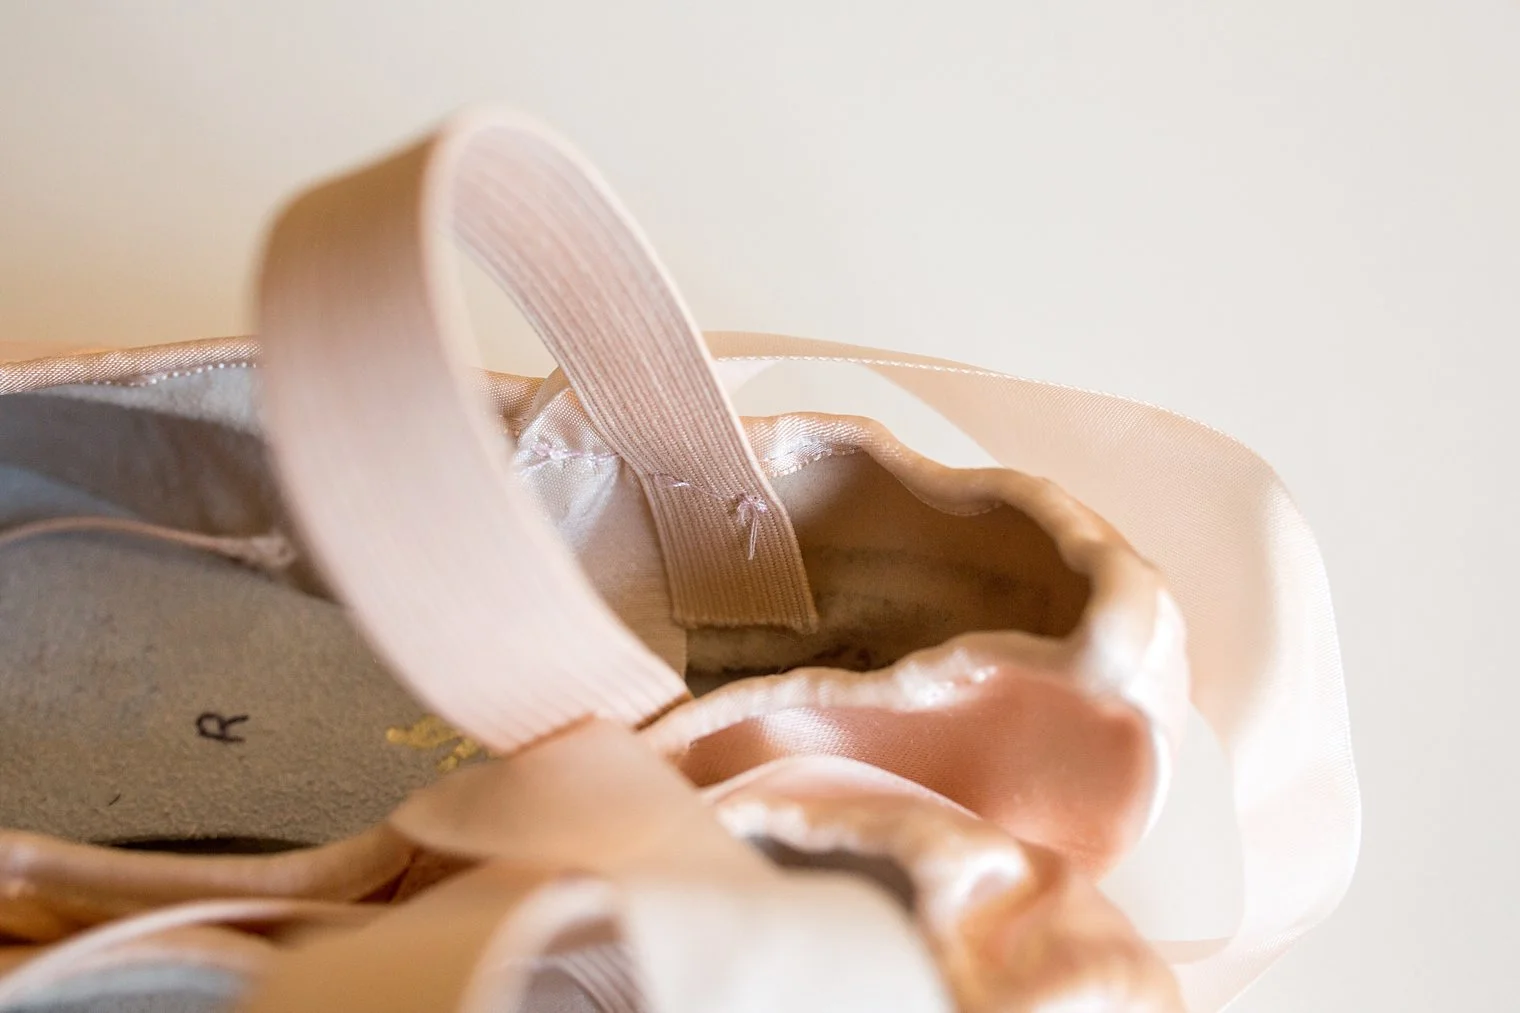 How to sew elastic bands onto ballet shoes tutorial